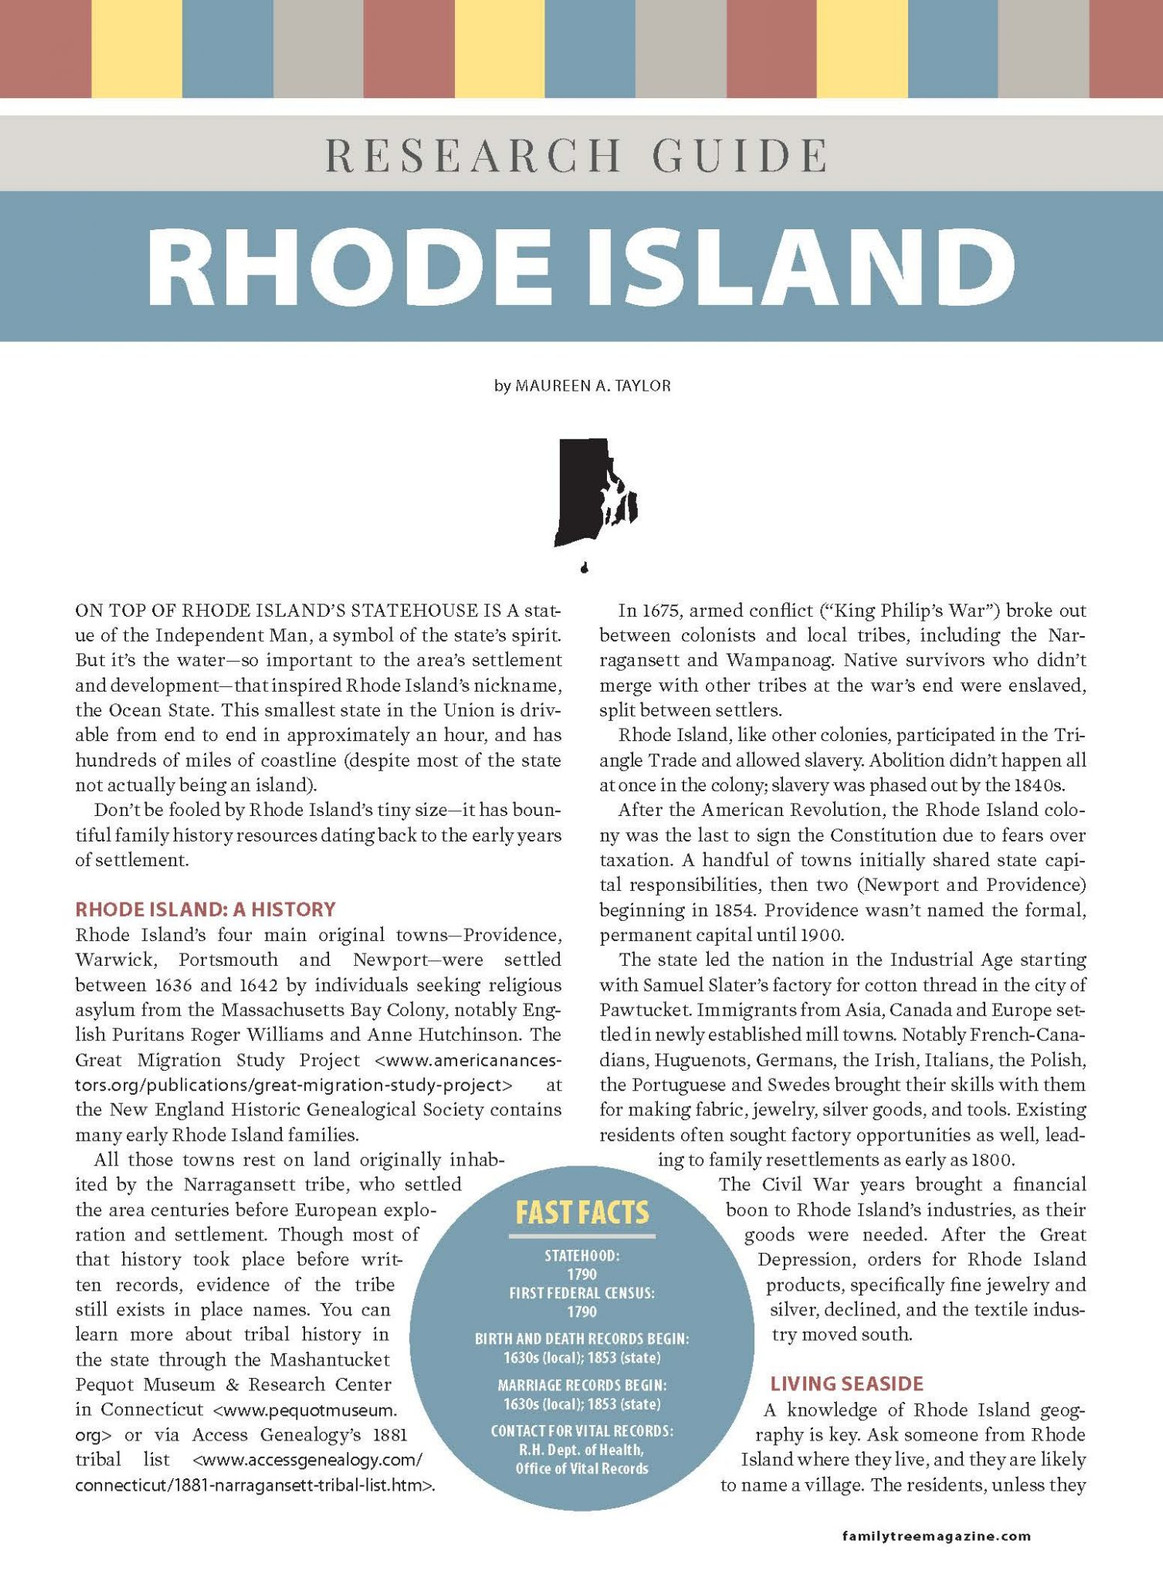 Rhode-Island-research-guide-cover